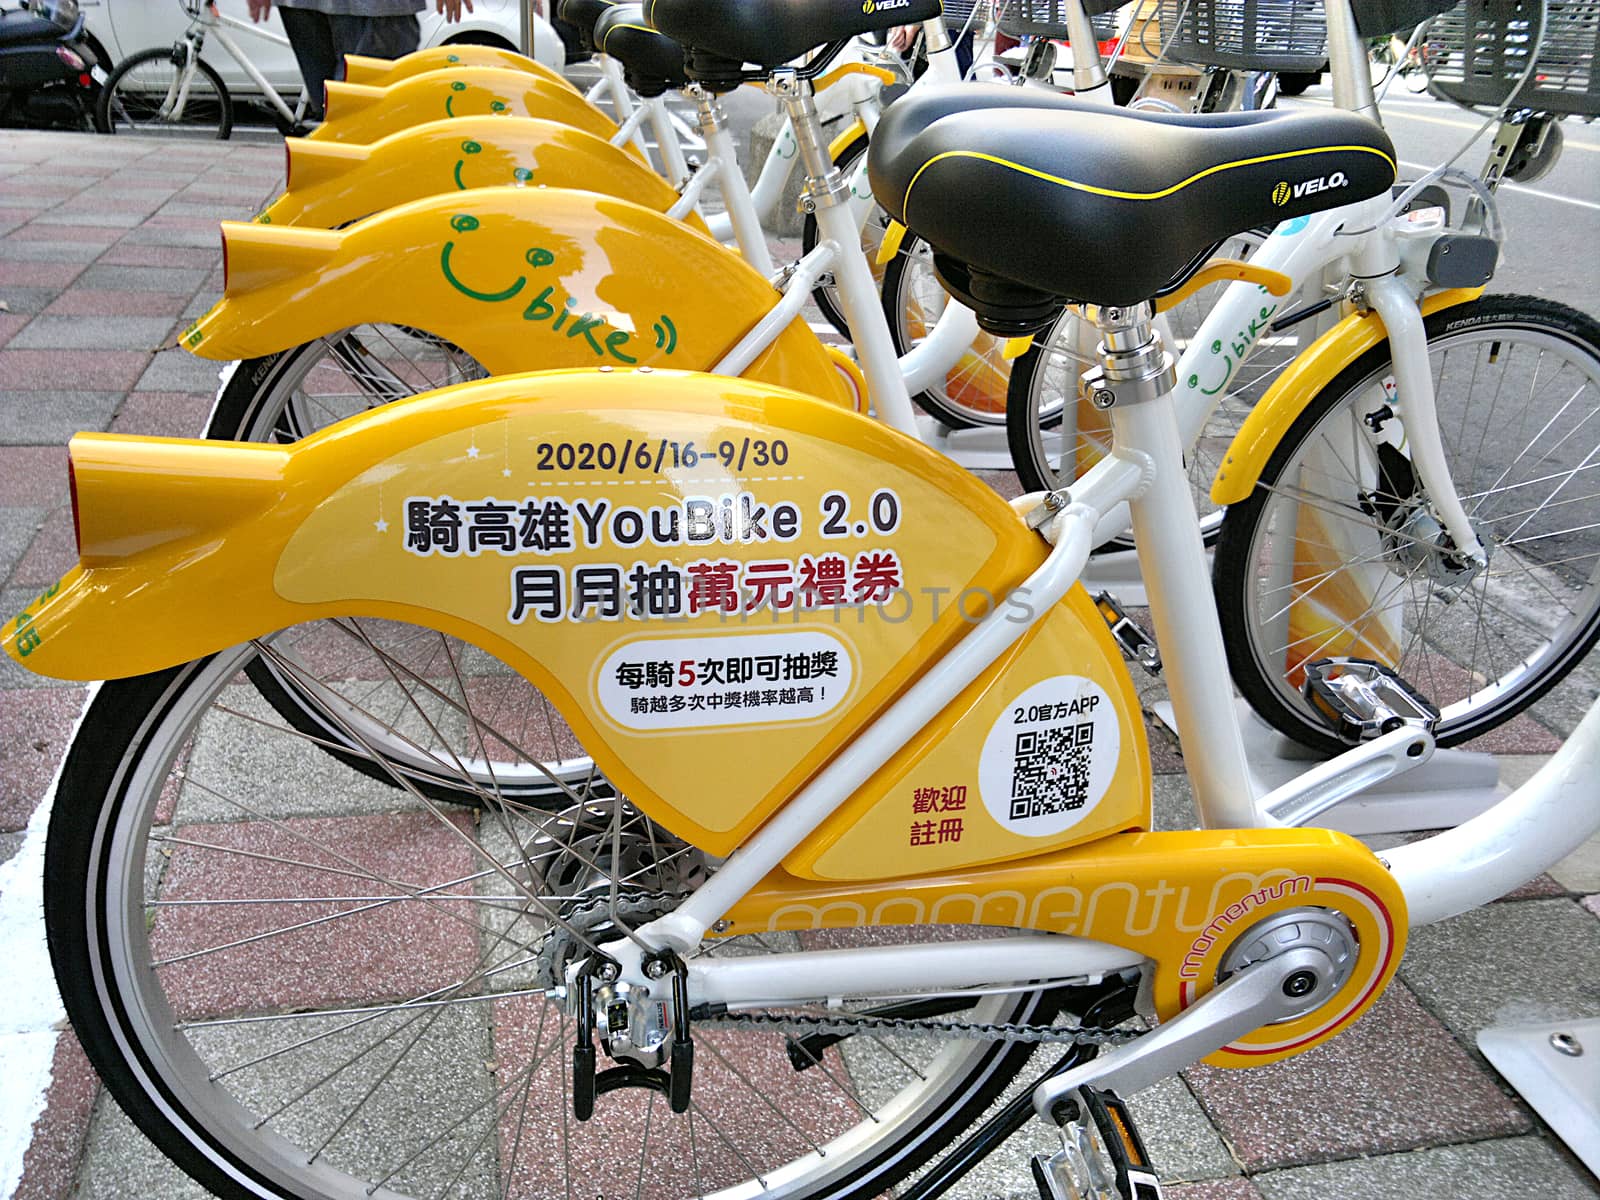 KAOHSIUNG, TAIWAN -- JUNE 22, 2020: Kaohsiung city government installs a new bike sharing system called Youbike 2.0.